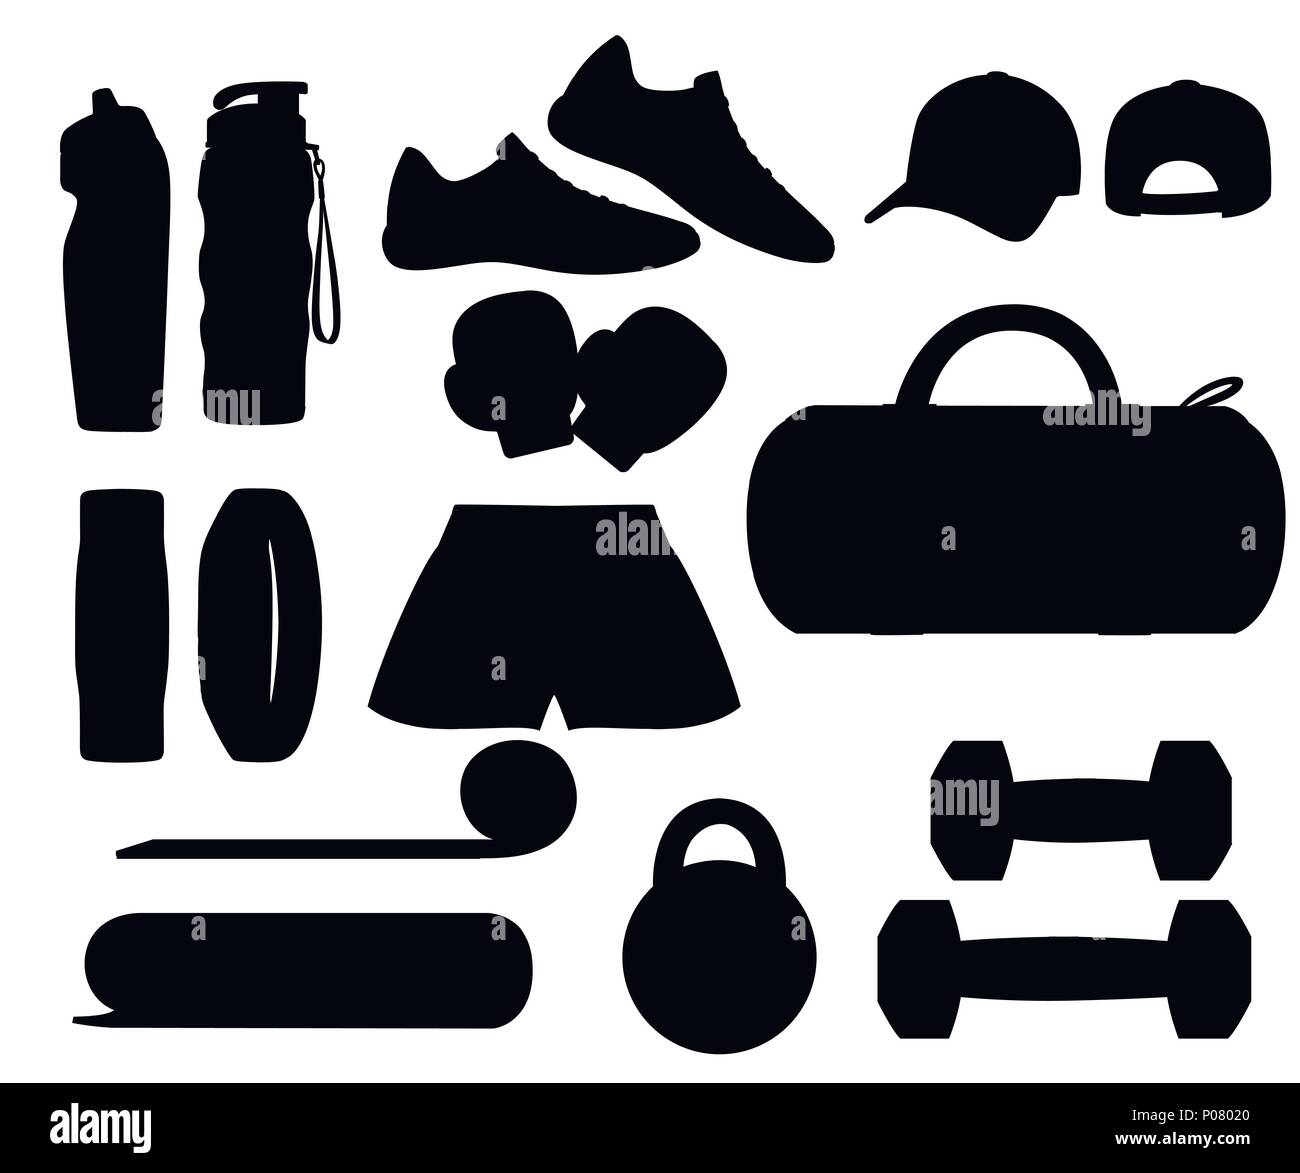 https://c8.alamy.com/comp/P08020/black-silhouette-set-of-sports-accessories-and-clothes-icons-for-classes-in-the-gym-vector-illustration-isolated-on-white-background-P08020.jpg